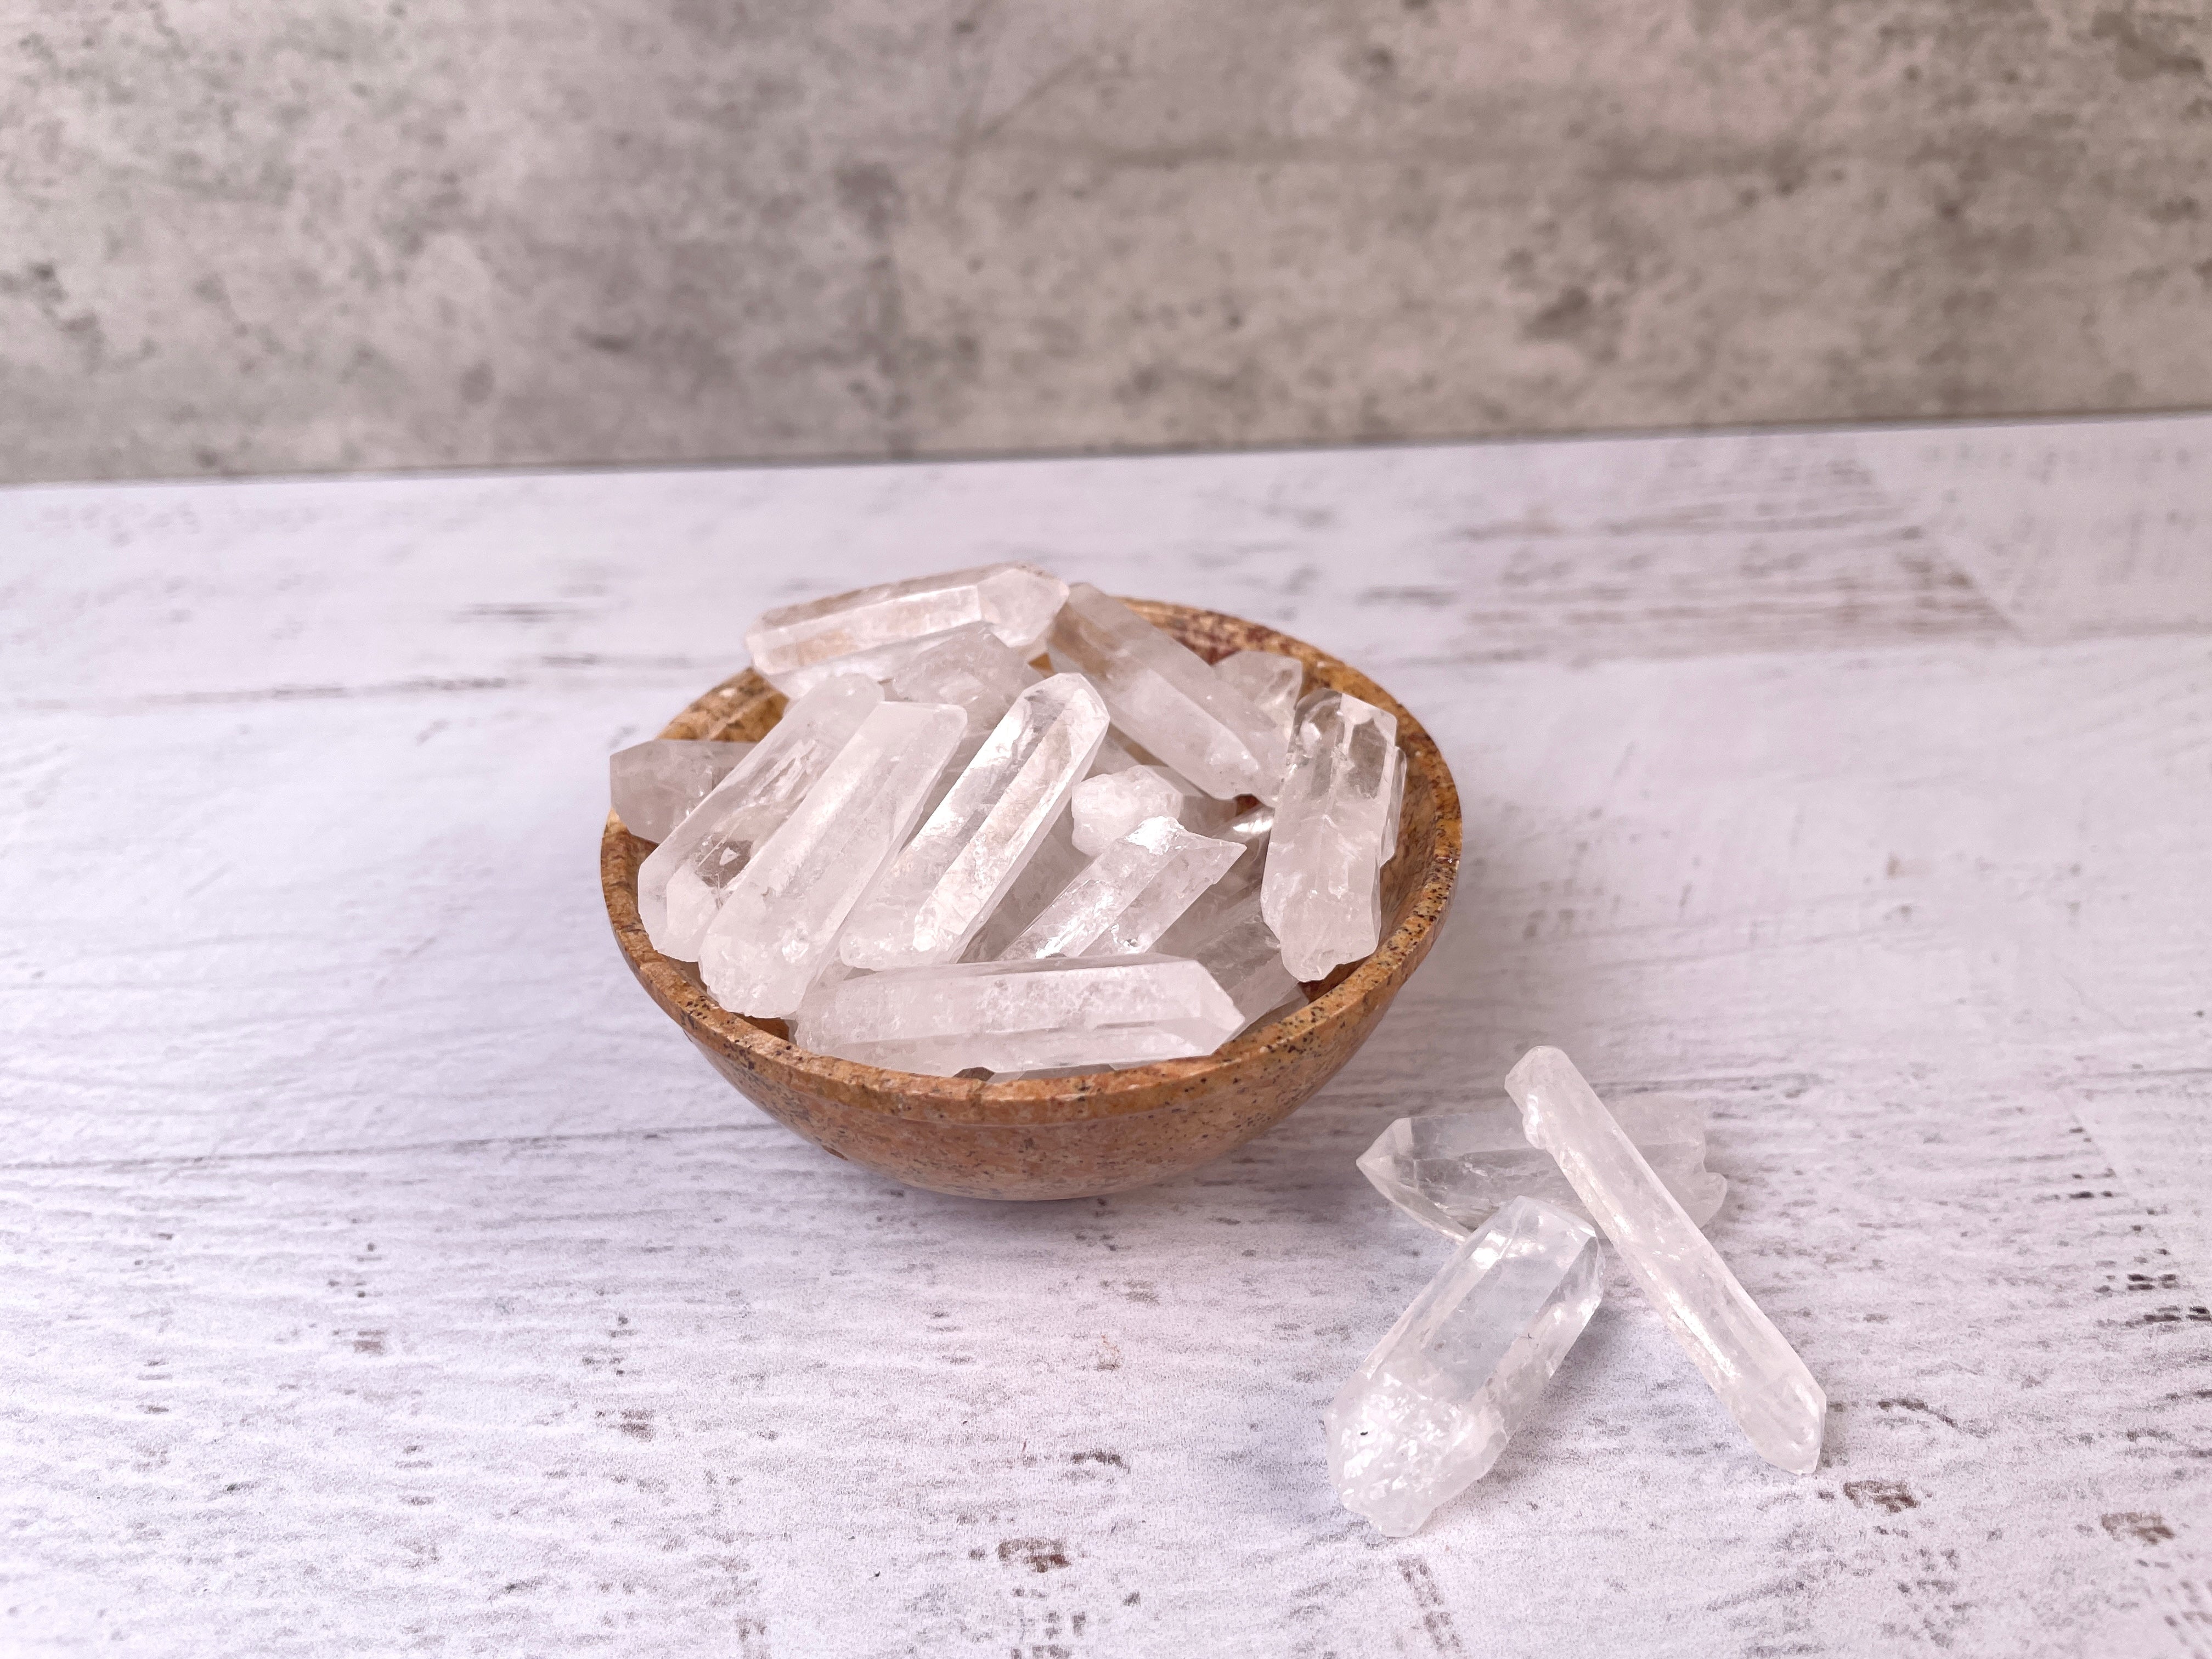 Buy Online Latest and Unique Raw Crystal Points - Manifestation, Magnification, Programmability, Cleansing, Healing | Shop Best Spiritual Items - The Mystical Ritual